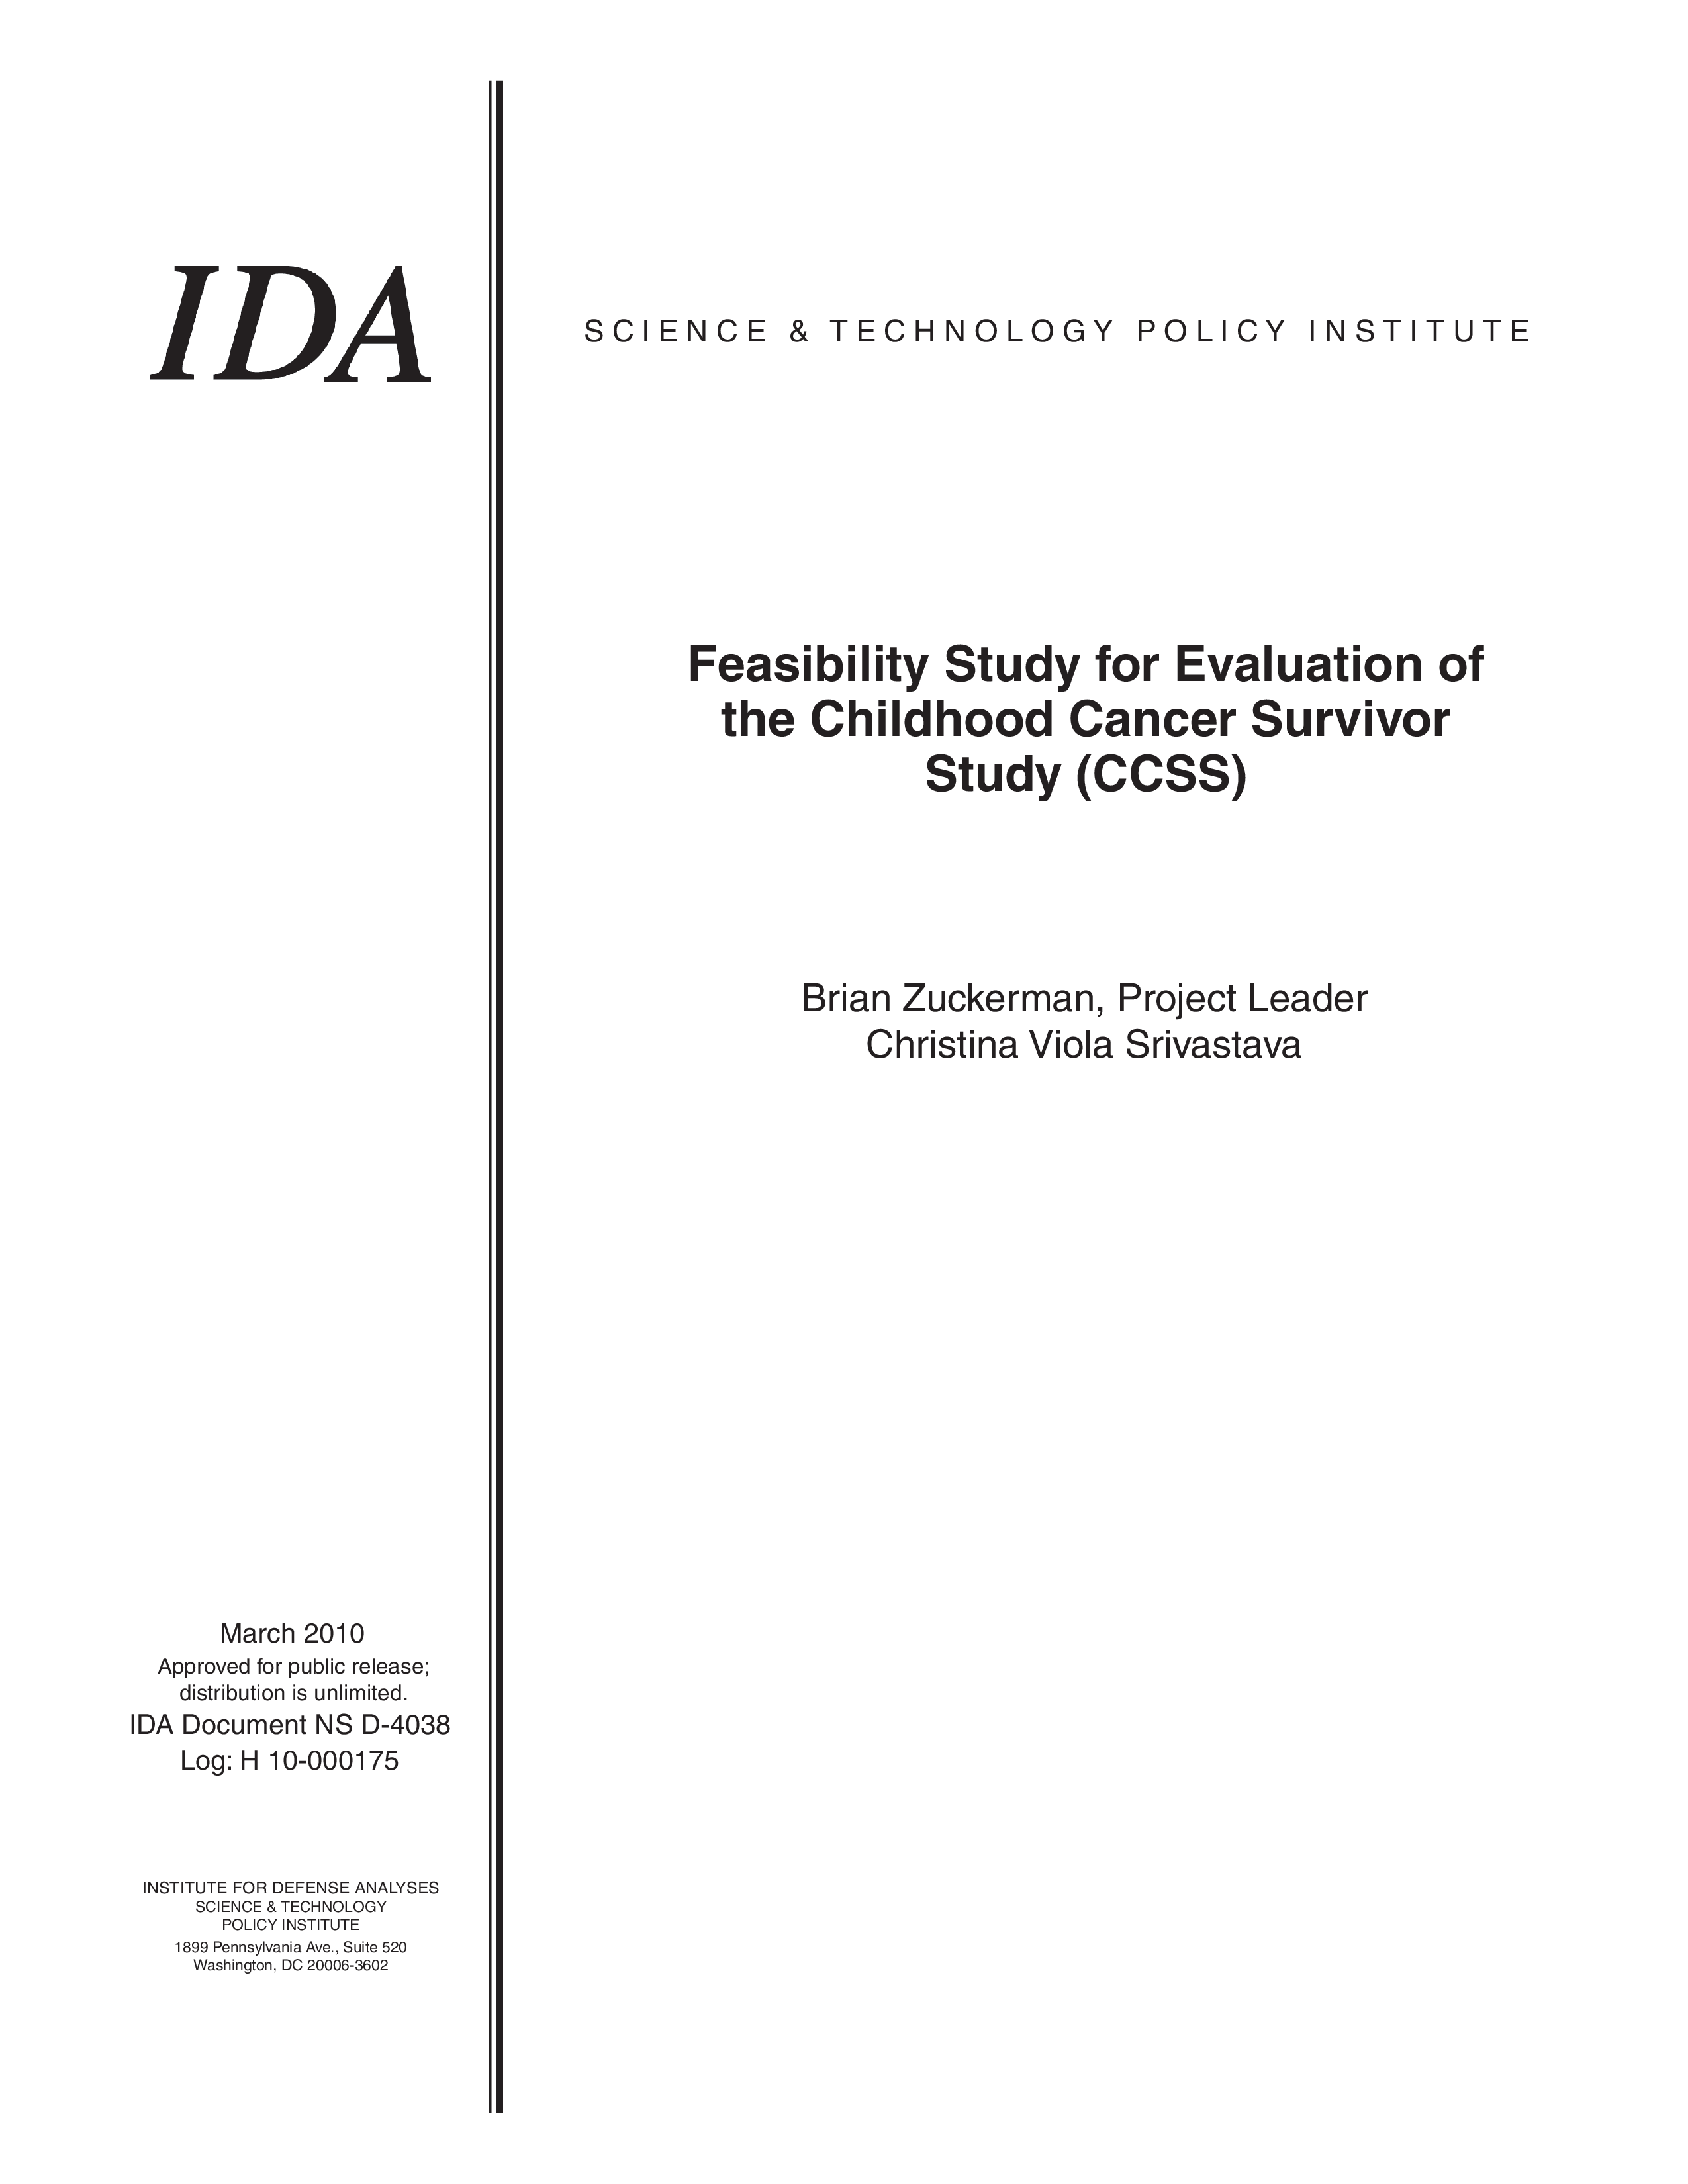 Feasibility Study for Evaluation of the Childhood Cancer Survivor Study (CCSS)